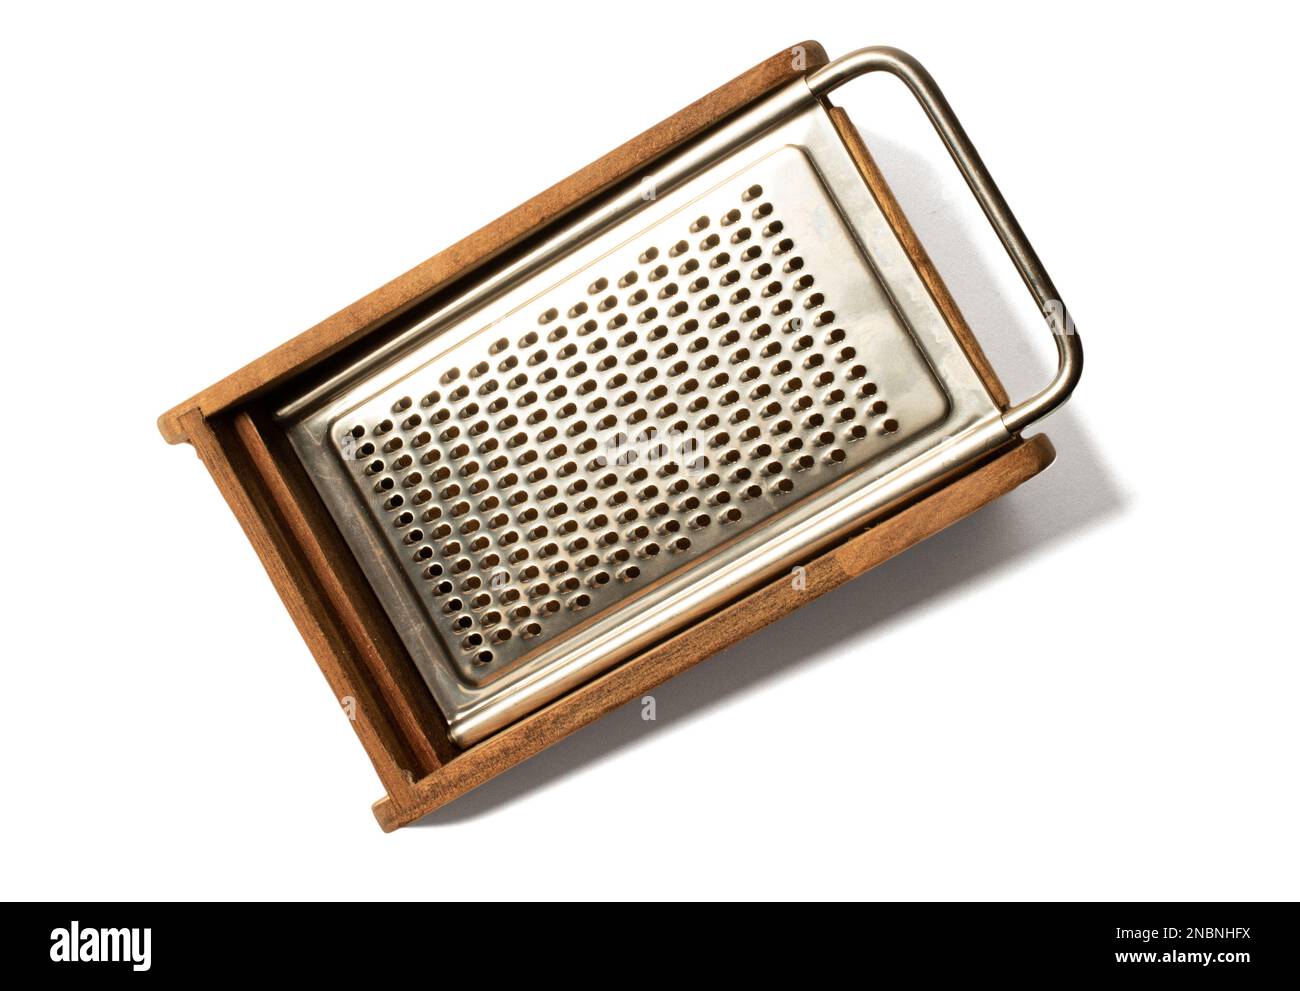 https://c8.alamy.com/comp/2NBNHFX/cheese-grater-food-classic-wooden-and-metal-kitchen-on-white-backgroundvintage-kitchen-utensil-on-white-isolated-copyspaceshredder-overview-2NBNHFX.jpg